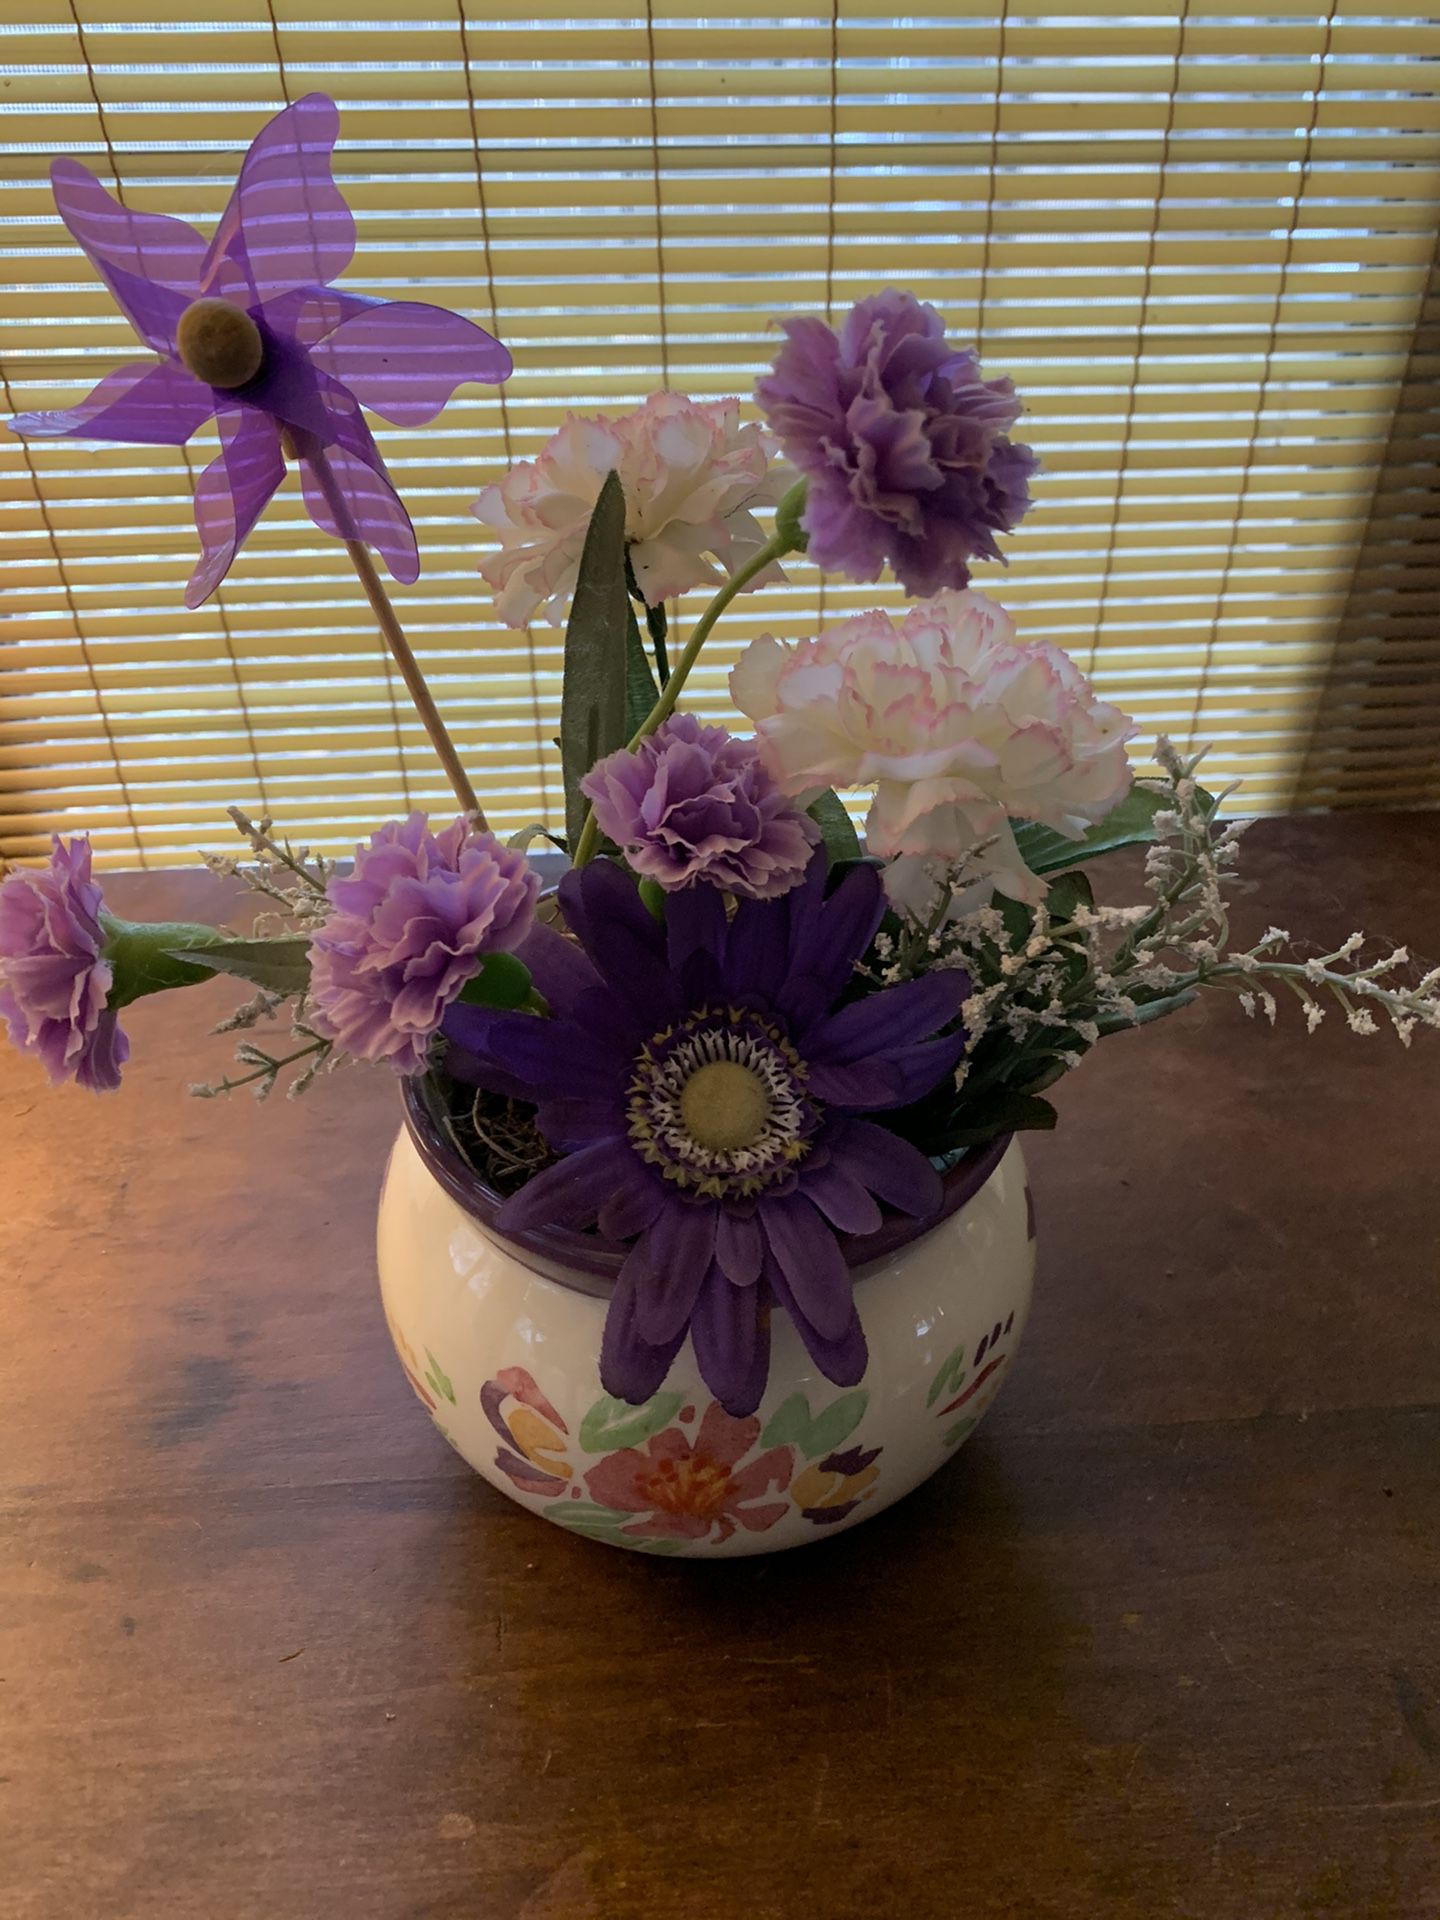 Ceramic vase with artificial flowers